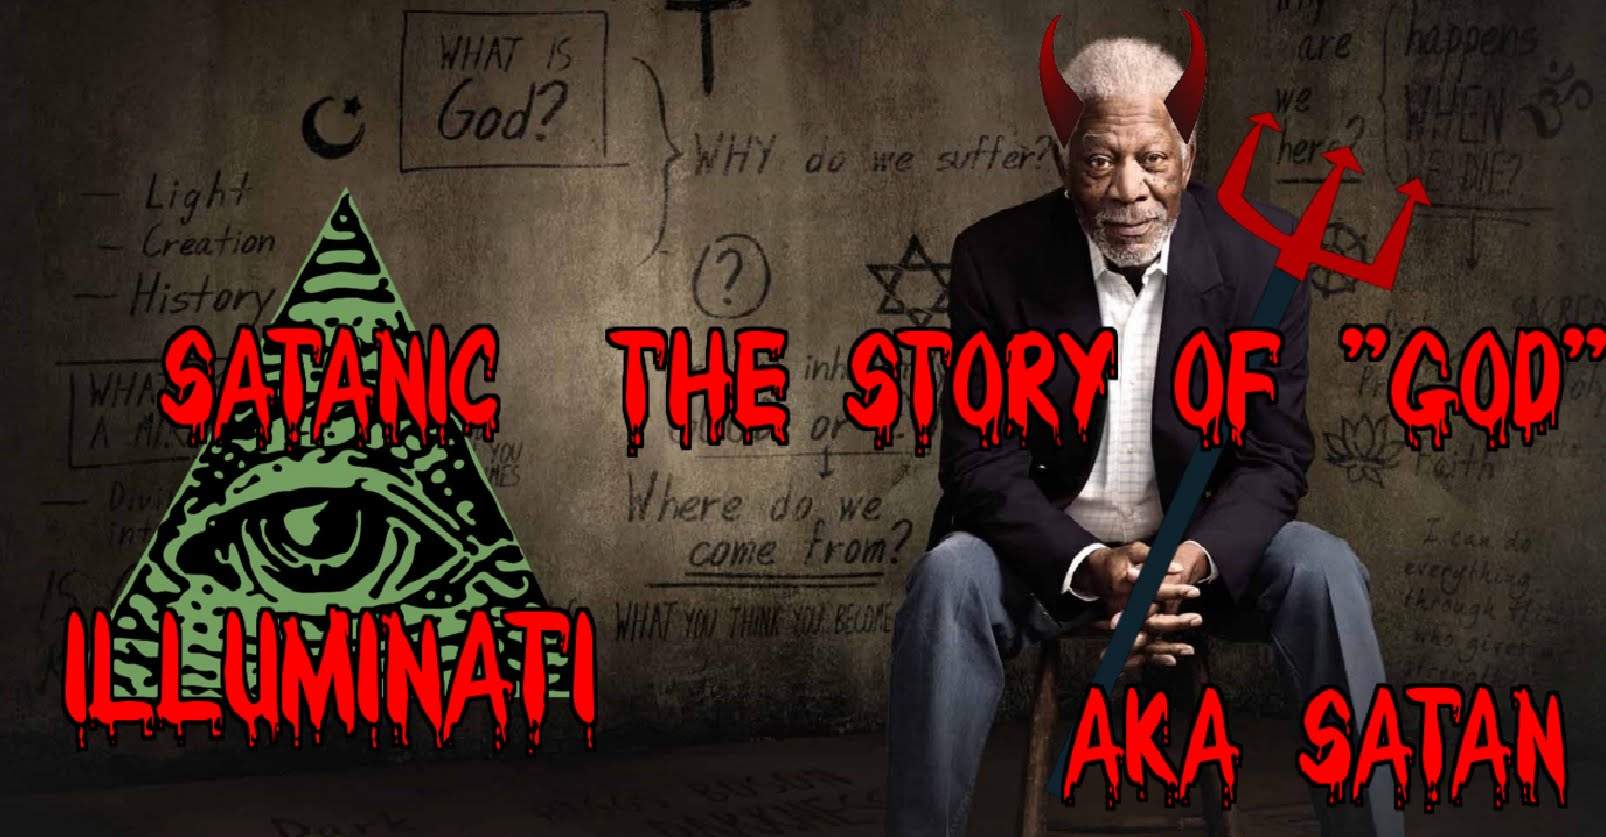 The Story of God aka Satan with Morgan Freeman on National Geographic EXPOSED